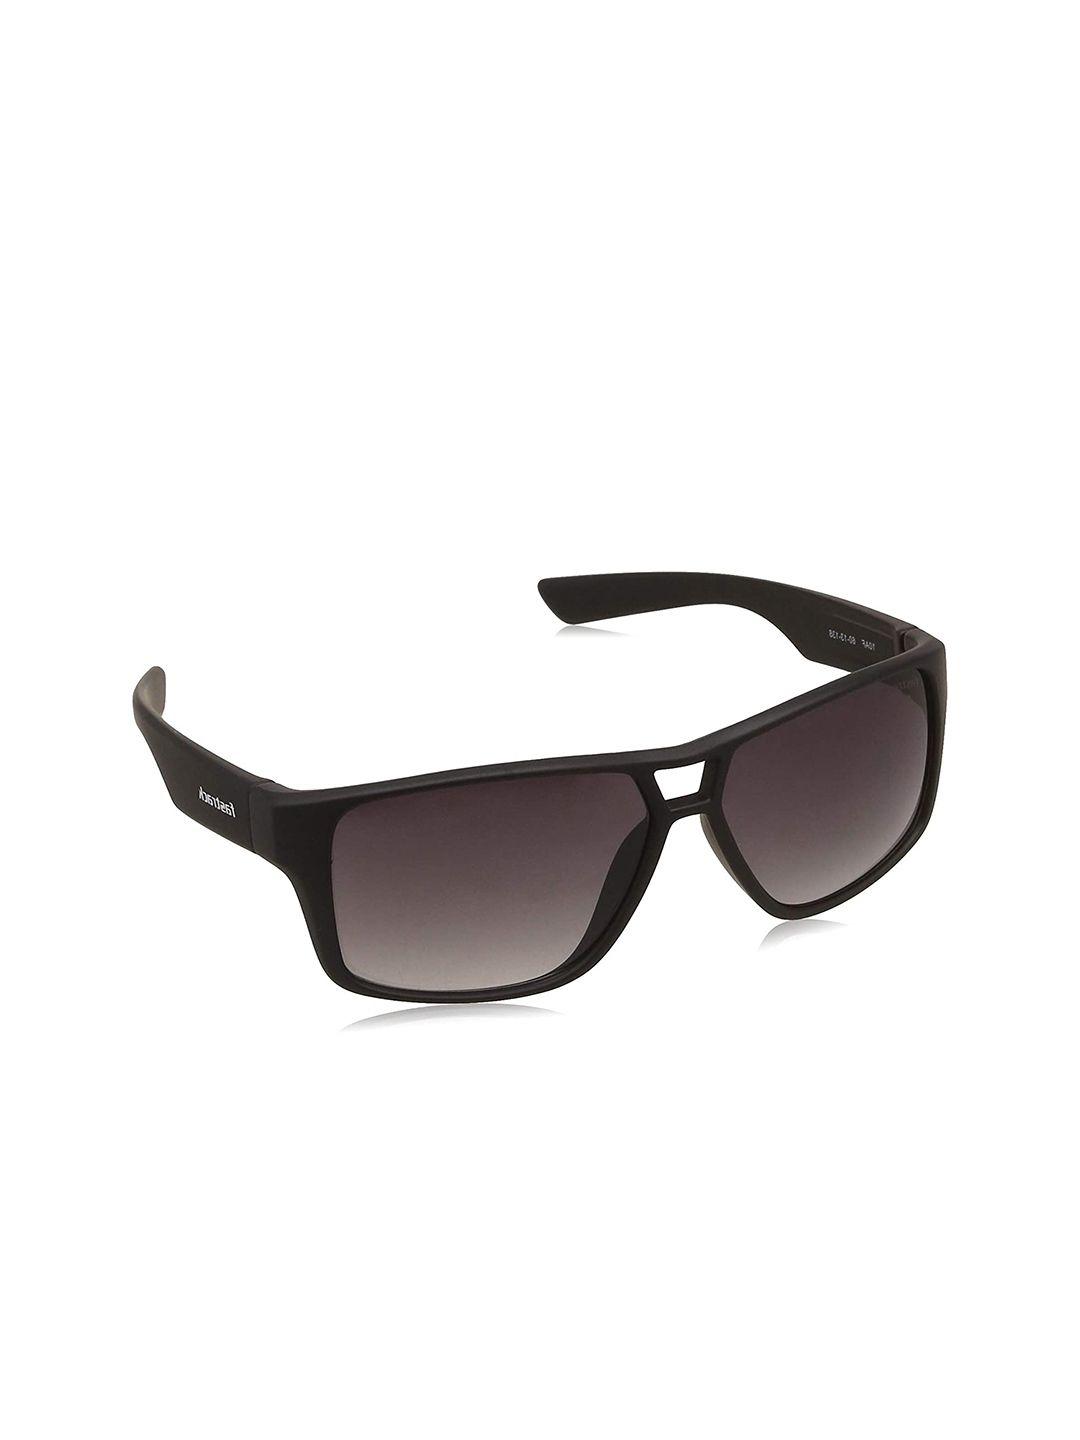 fastrack unisex grey lens & brown square sunglasses with uv protected lens